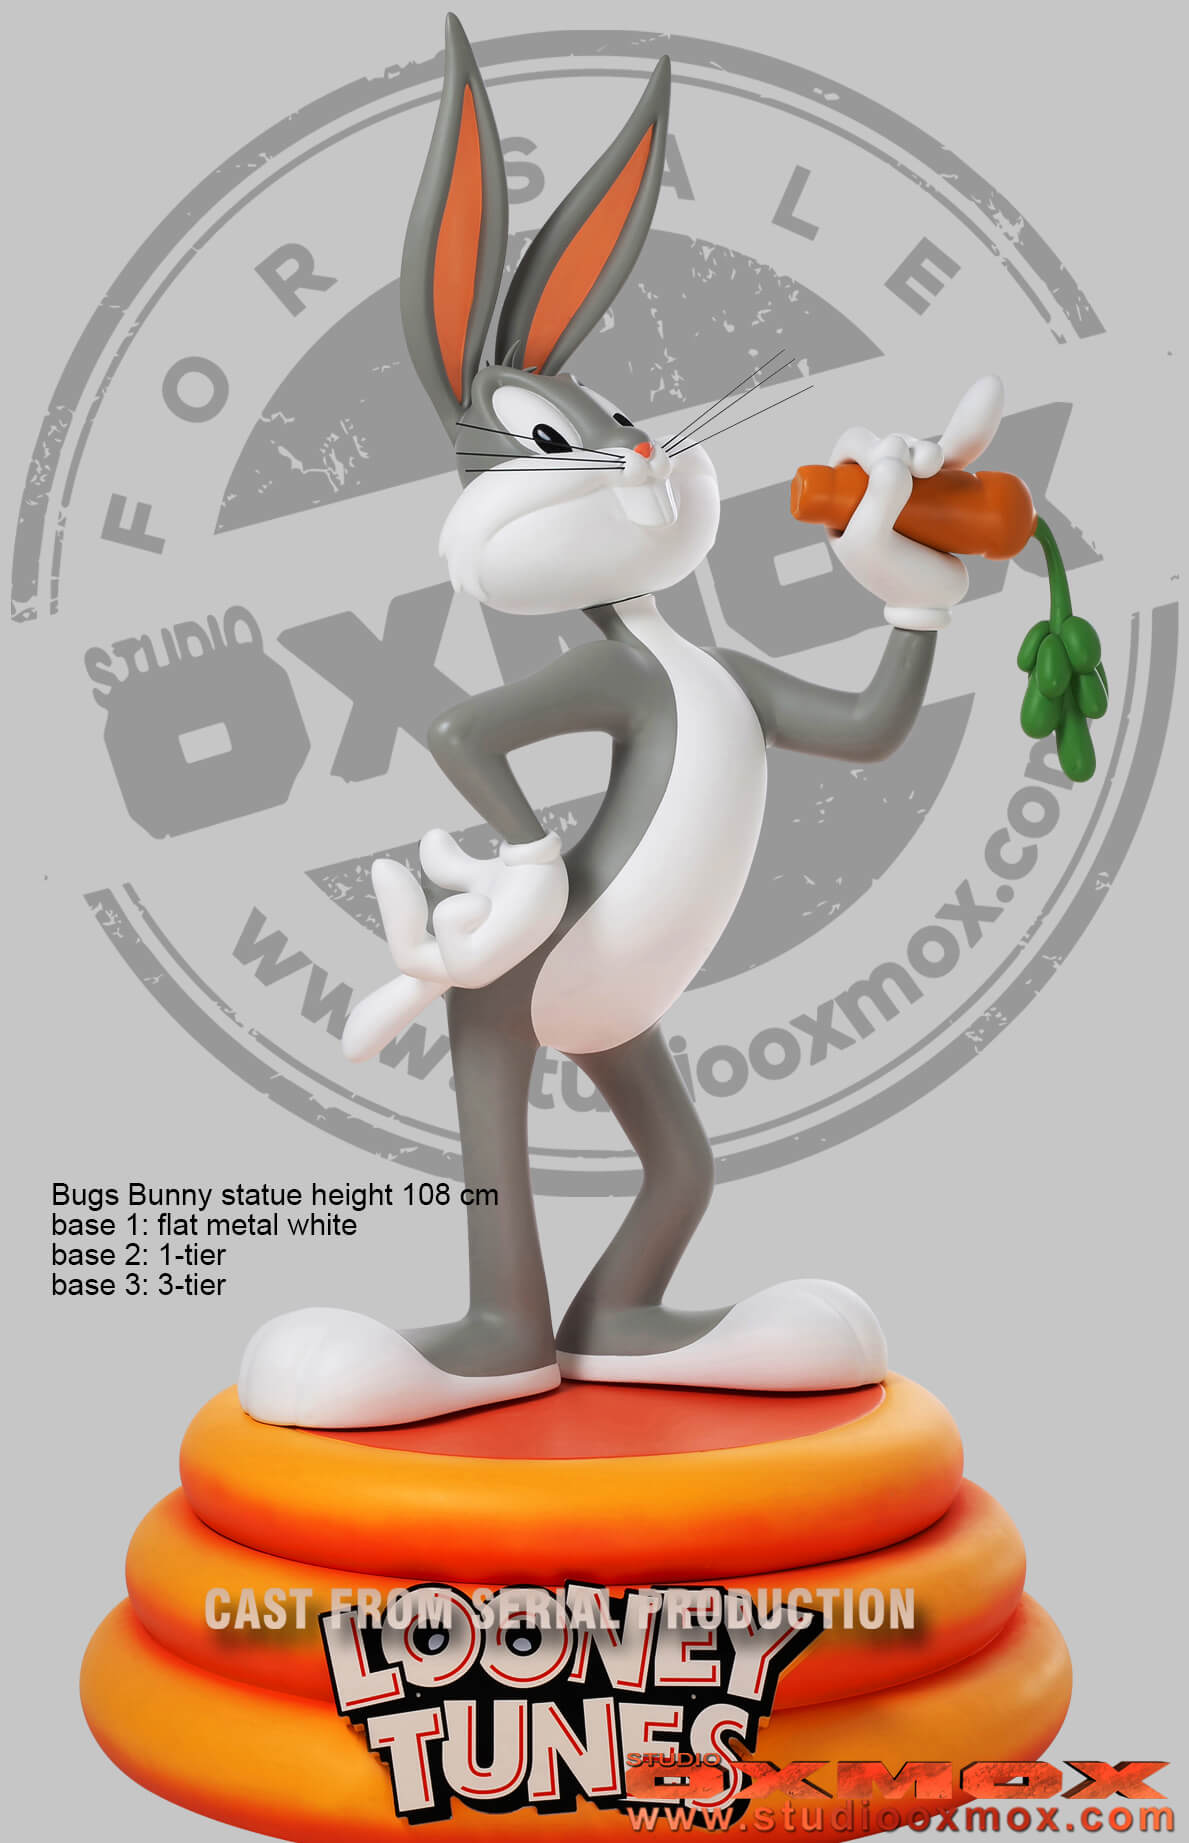 Looney Tunes statues, Bugs Bunny life size with large base